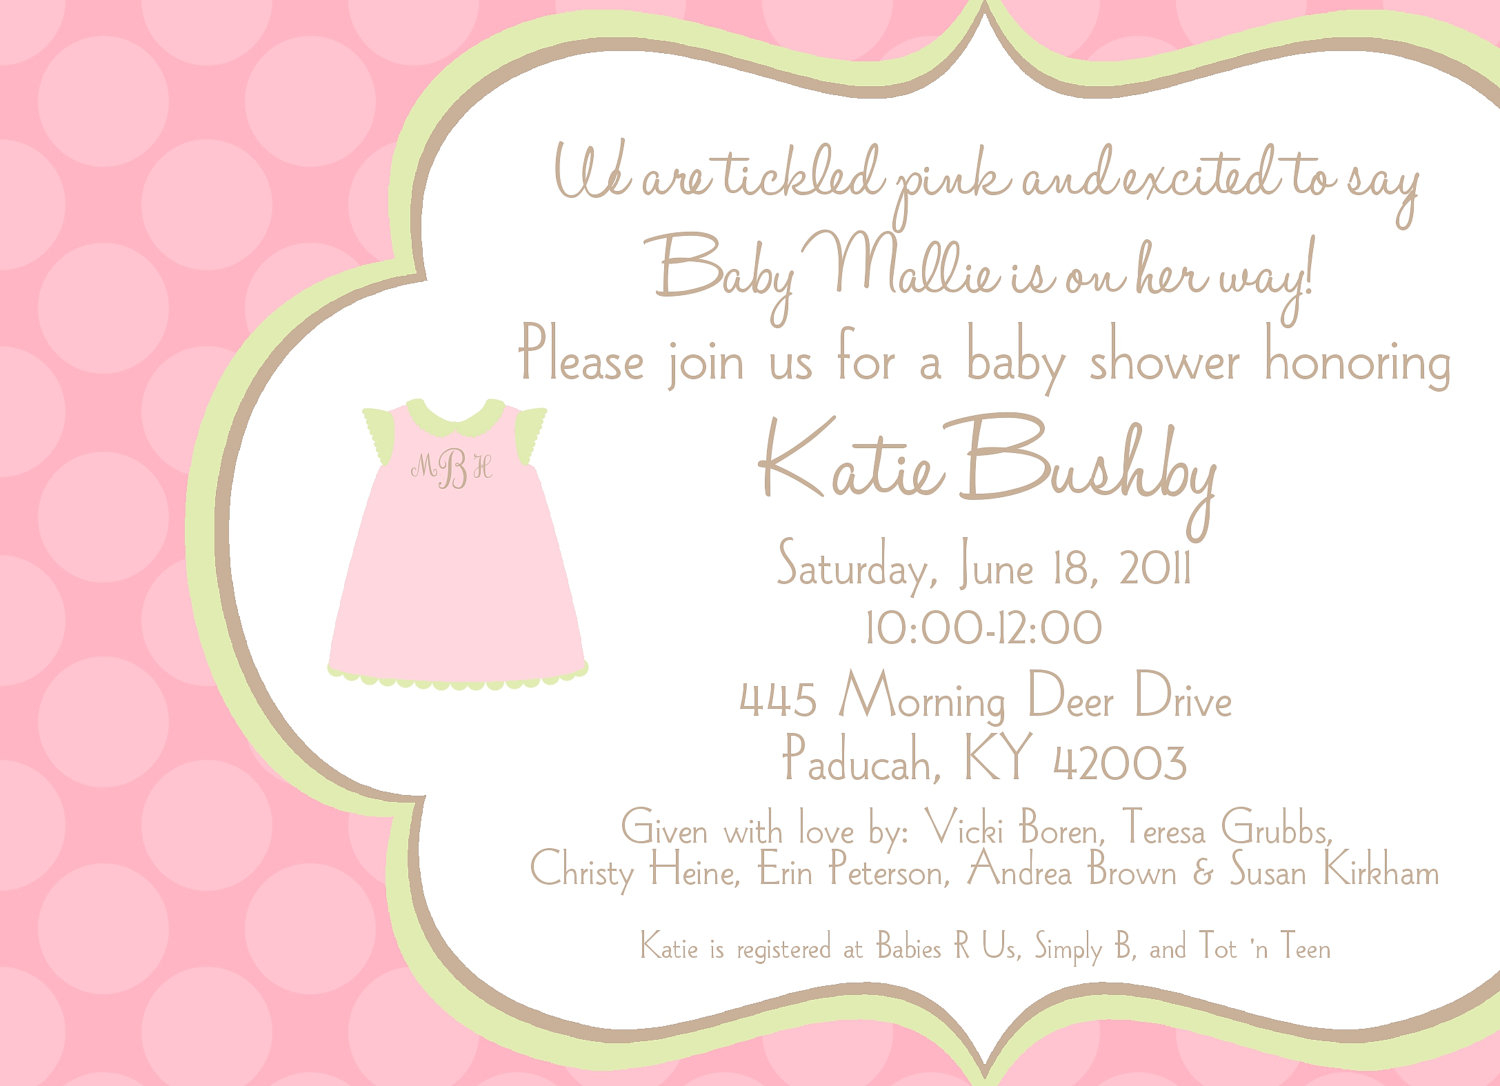 Full Size of Baby Shower:delightful Baby Shower Invitation Wording Picture Designs Baby Shower Invitation Wording As Well As Baby Shower Adalah With Best Baby Shower Gifts 2018 Plus Baby Shower Names Together With Baby Boy Shower Favors